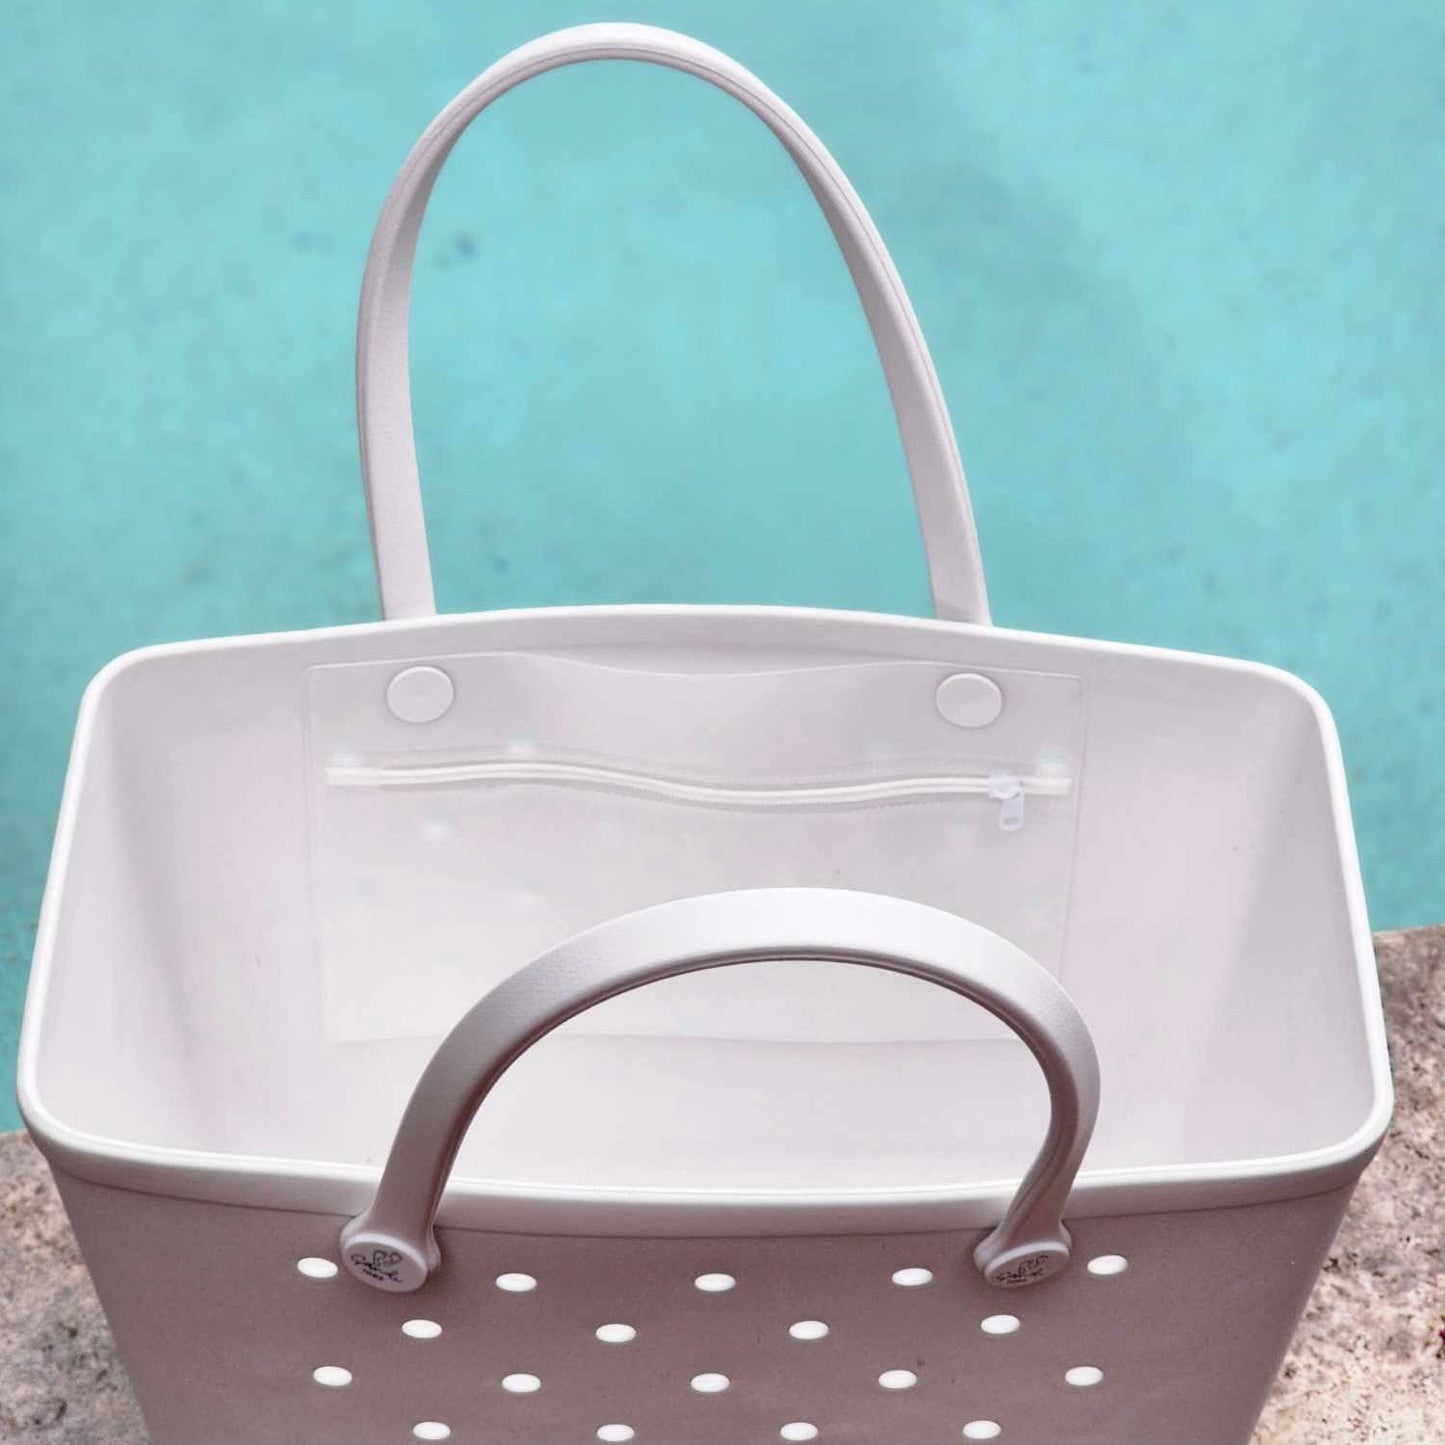 White Haven Silicone Bag (Sandi Toes): Spacious Poolside Organizer. [Open White Haven silicone bag with Sandi Toes logo reveals a large interior, perfect for storing poolside essentials like towels, sunscreen, and drinks.]